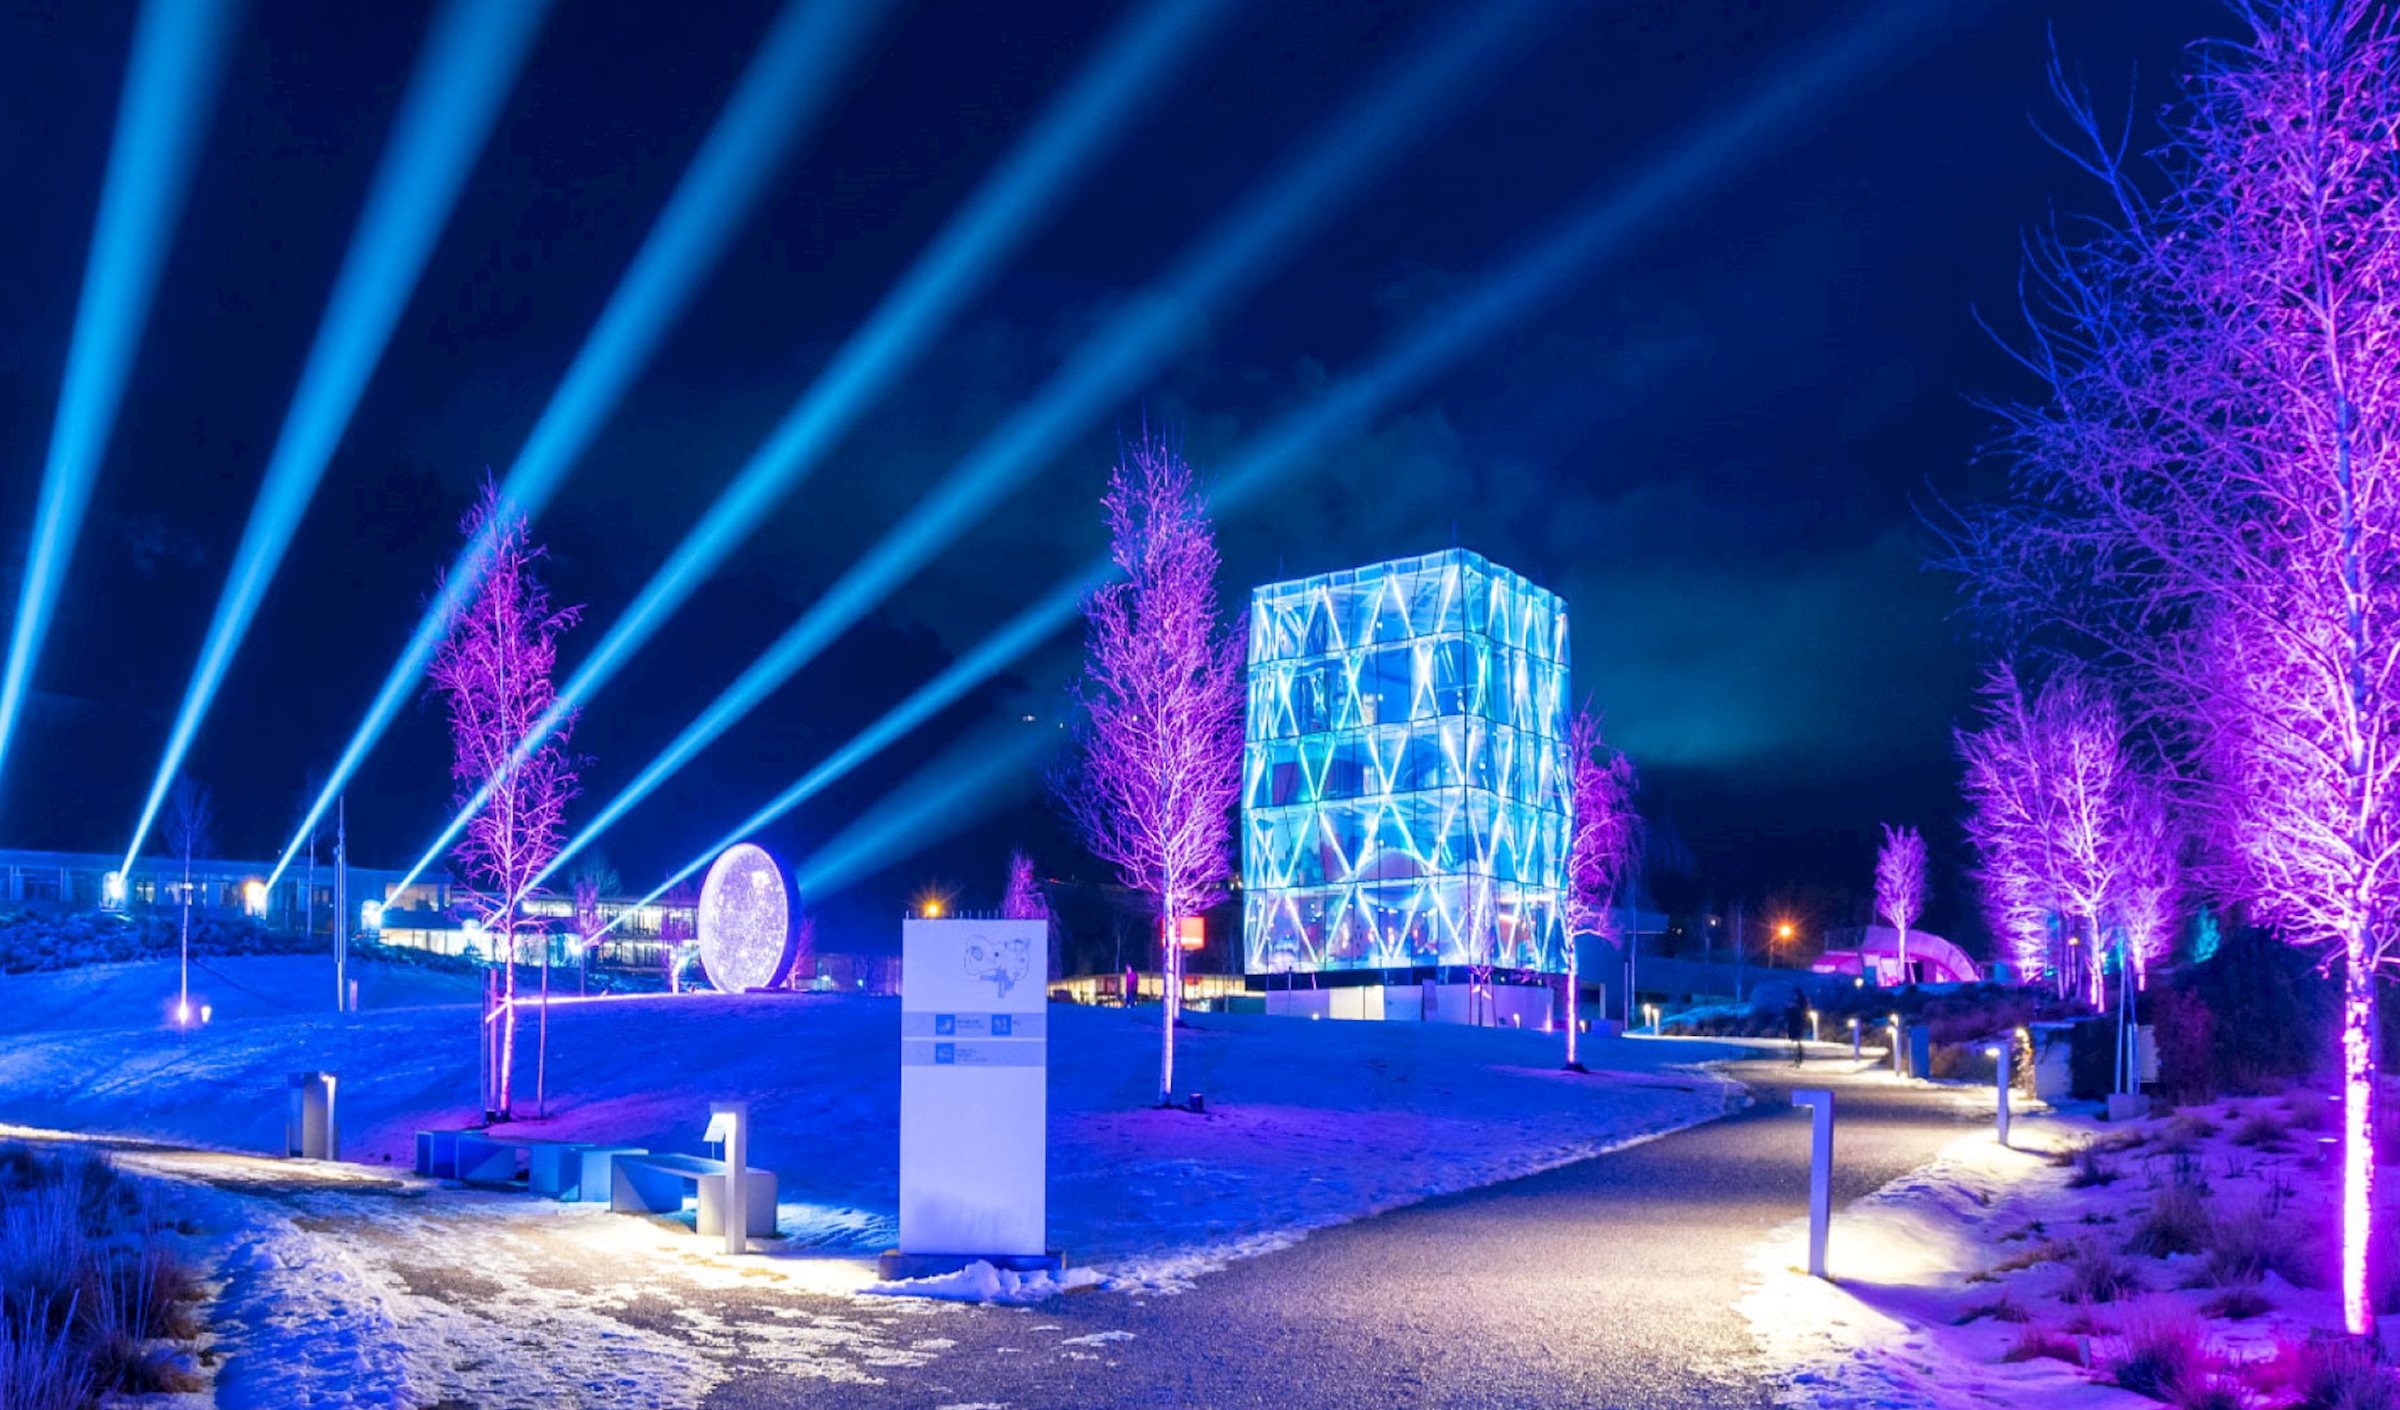 PRG was commissioned by Swarovski Kristallwelten with the installation of lighting and sound technology.